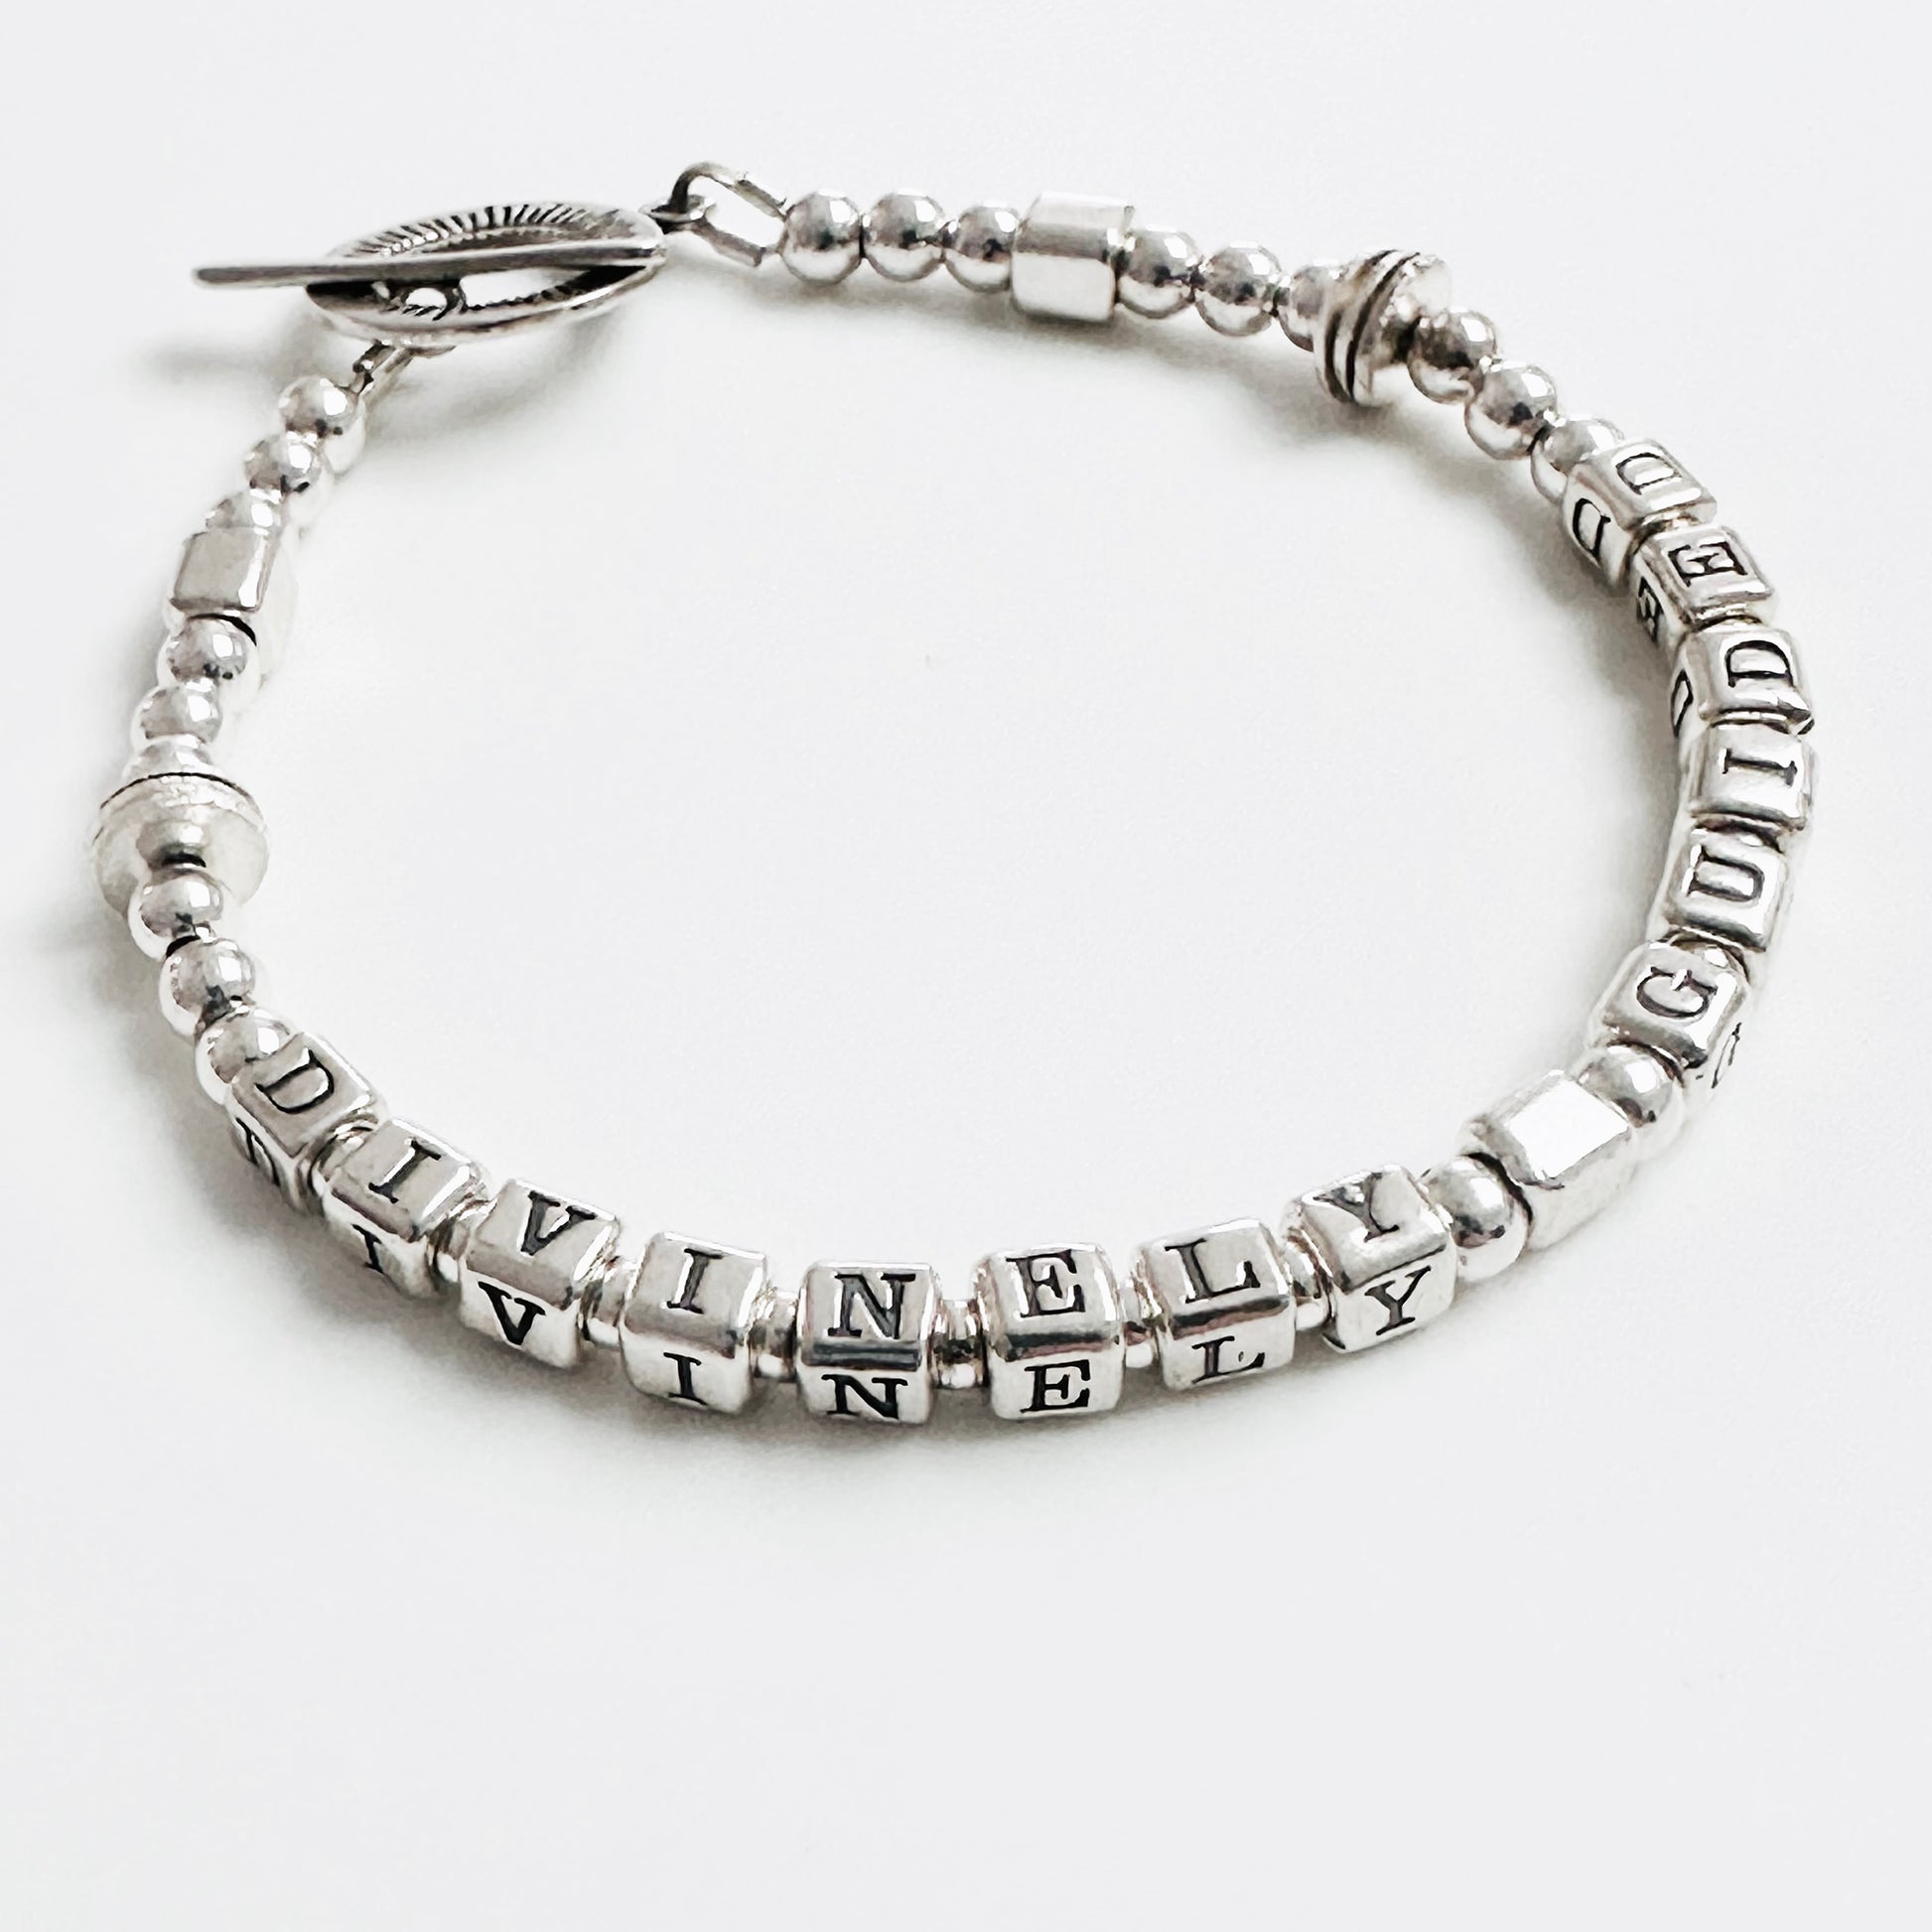 Divinely guided empowerment bracelet in sterling silver 